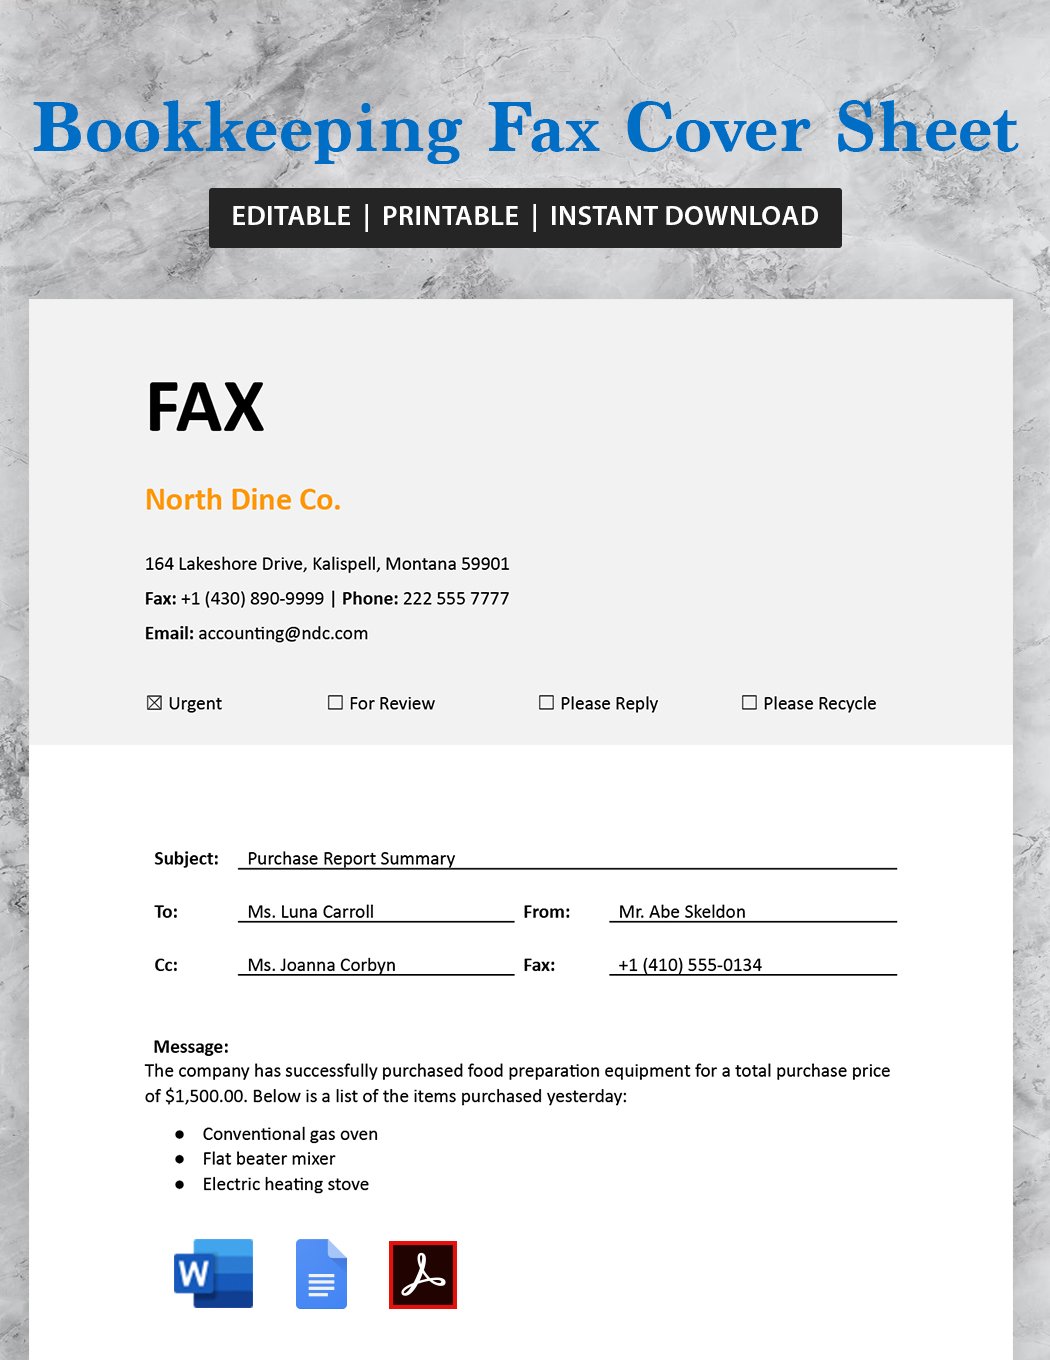 bookkeeping-fax-cover-sheet